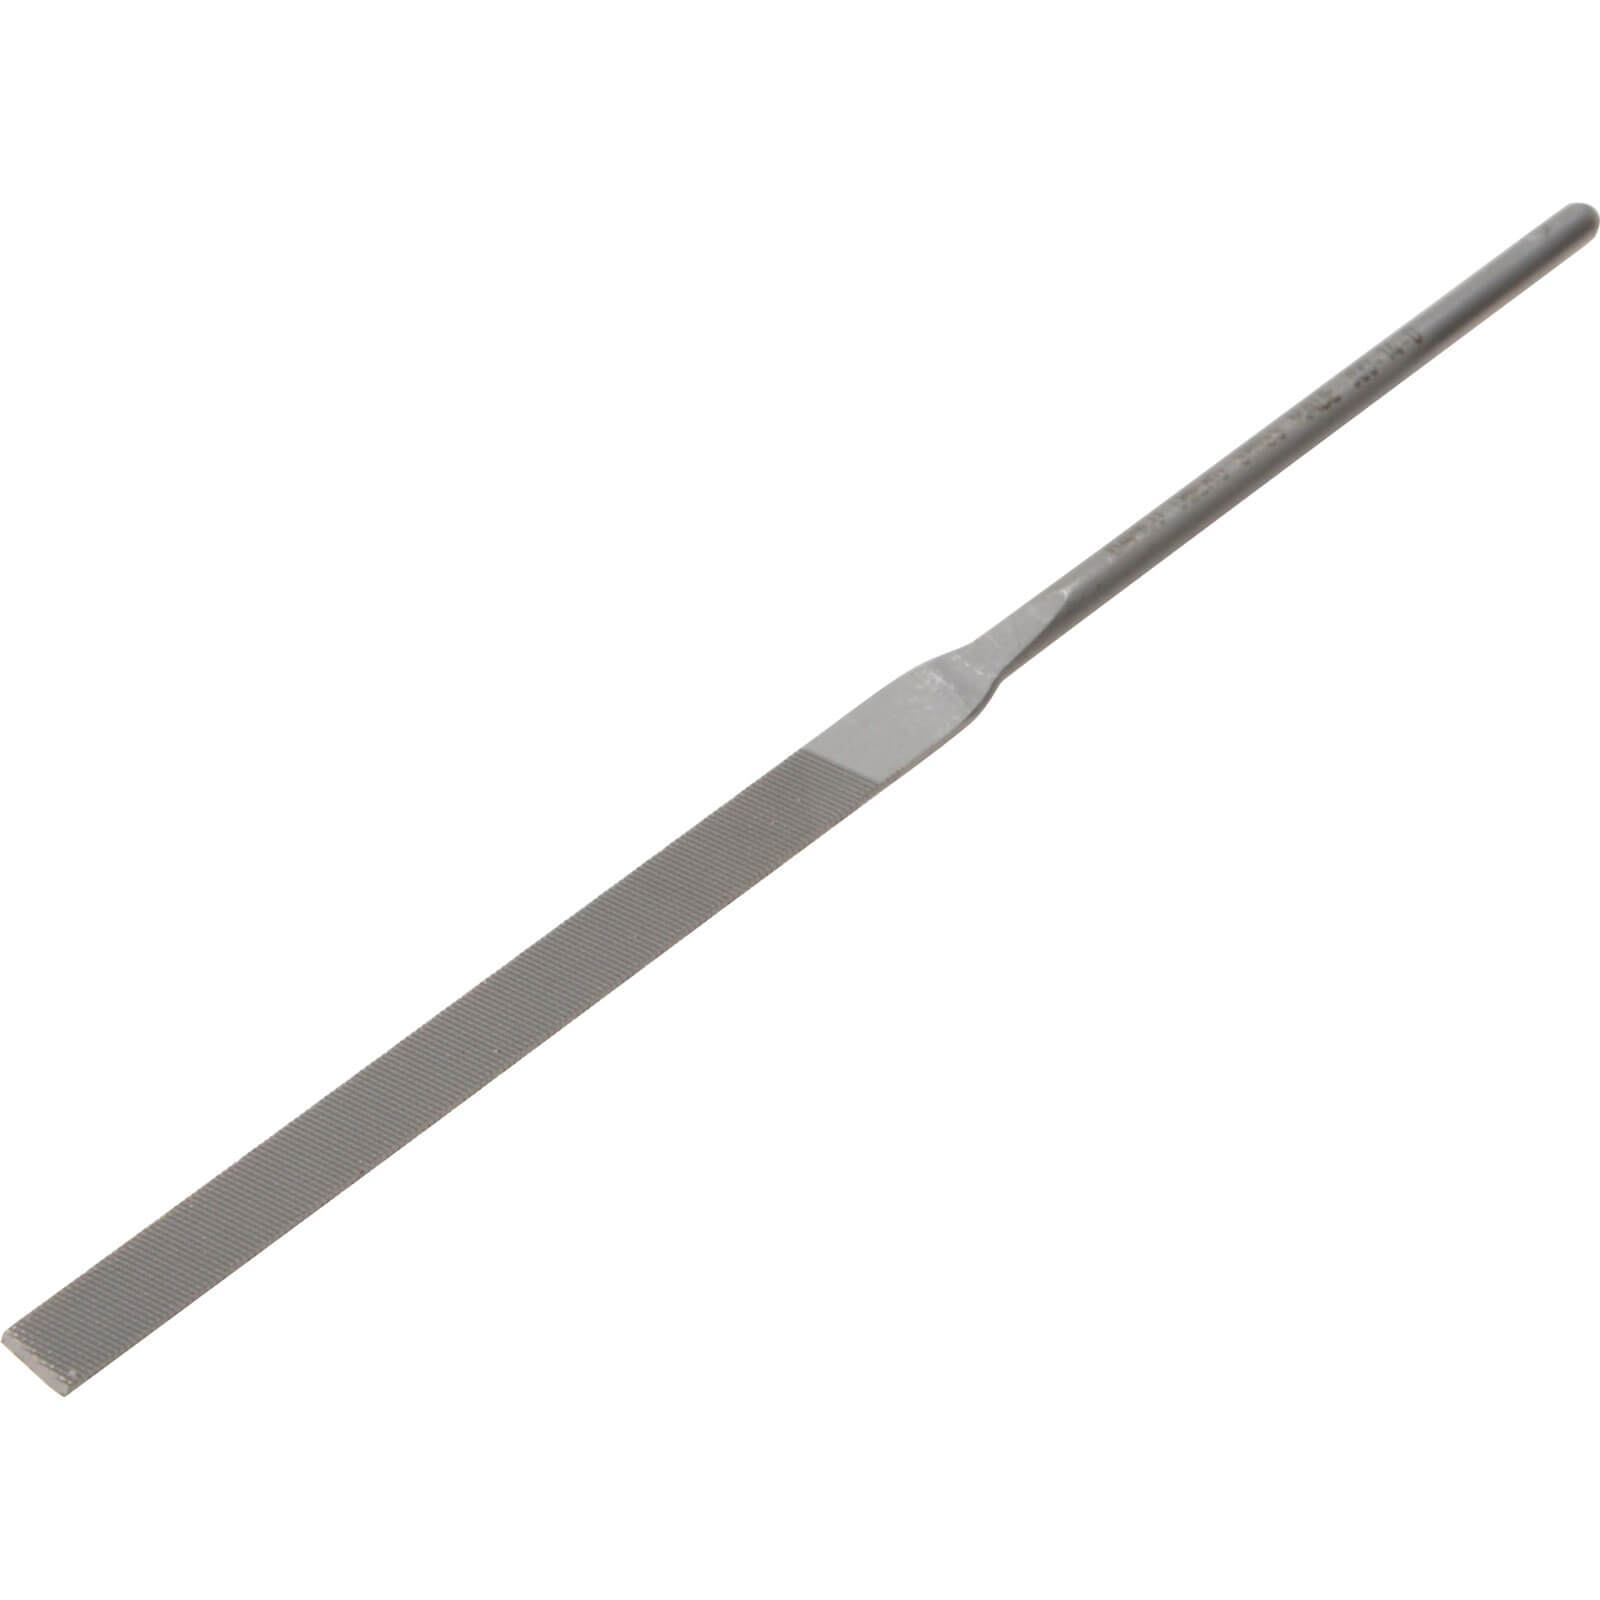 Bahco Hand Needle File 14cm Cut 2 Smooth